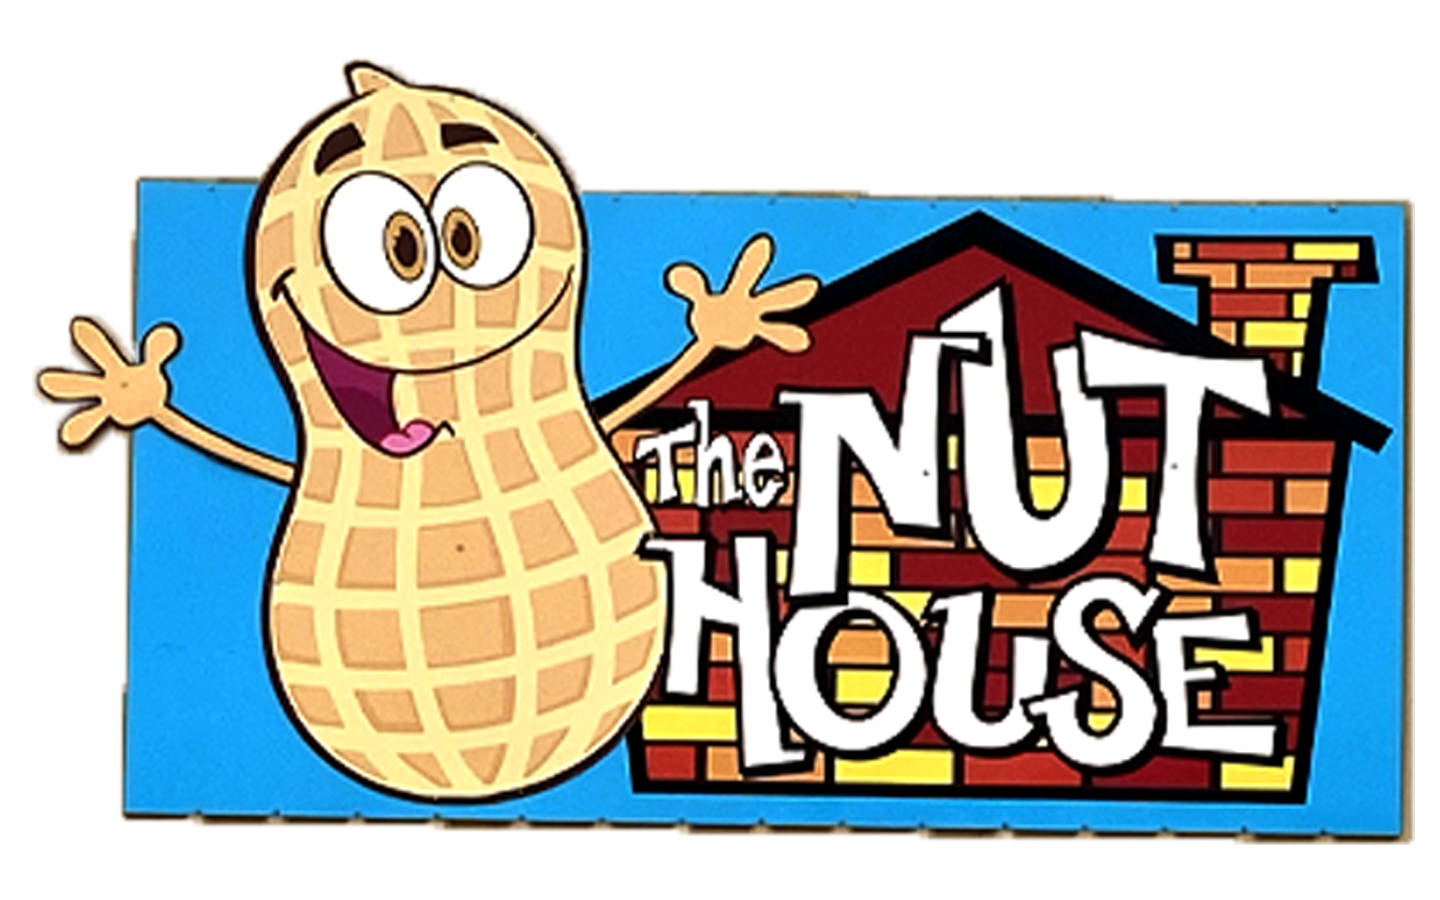 nut-house-news-the-nut-house-in-gail-tx